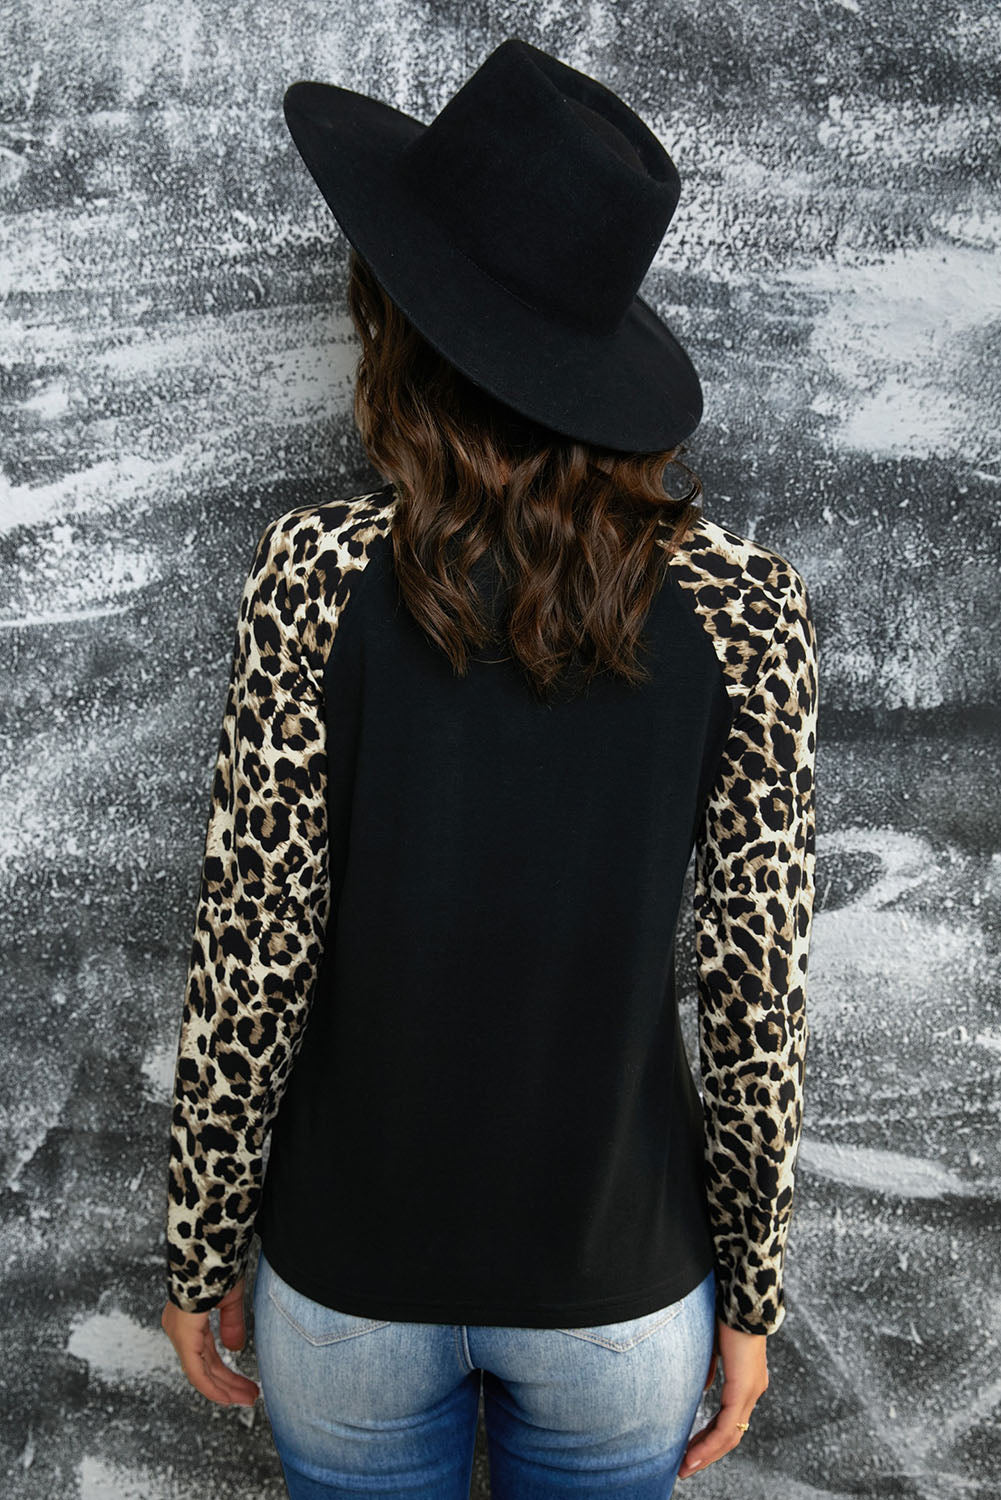 Leopard Print Grommet Long Sleeve Tee Print on any thing USA/STOD clothes